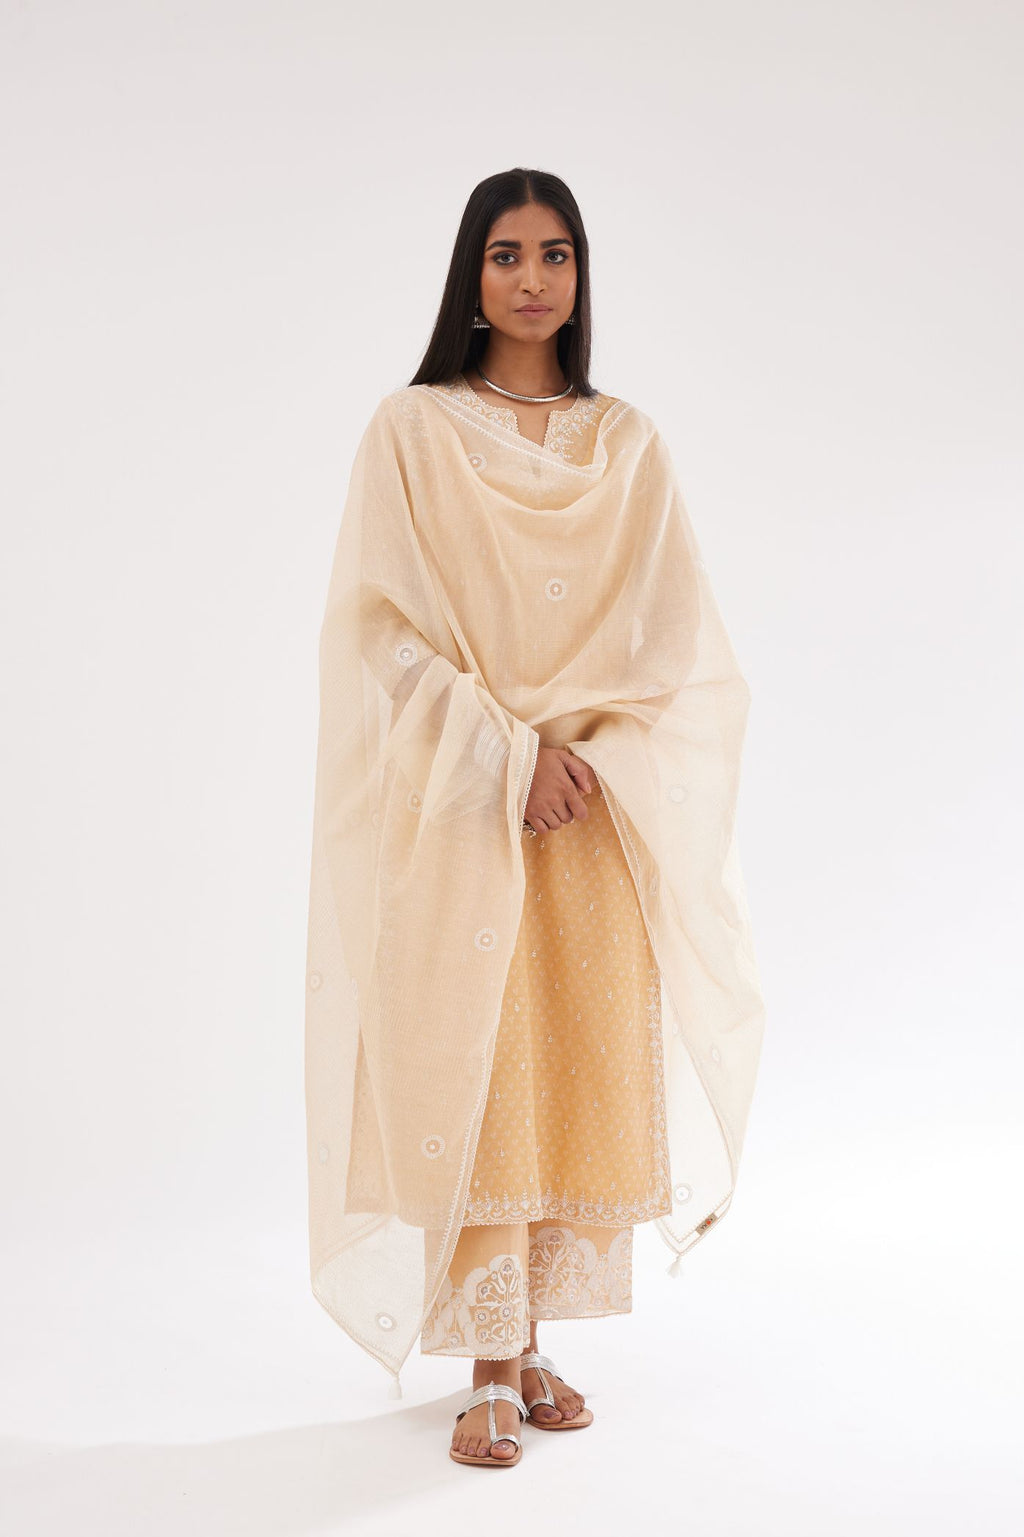 Peach cotton chanderi Dupatta with all-over hand block print and small embroidered butis.